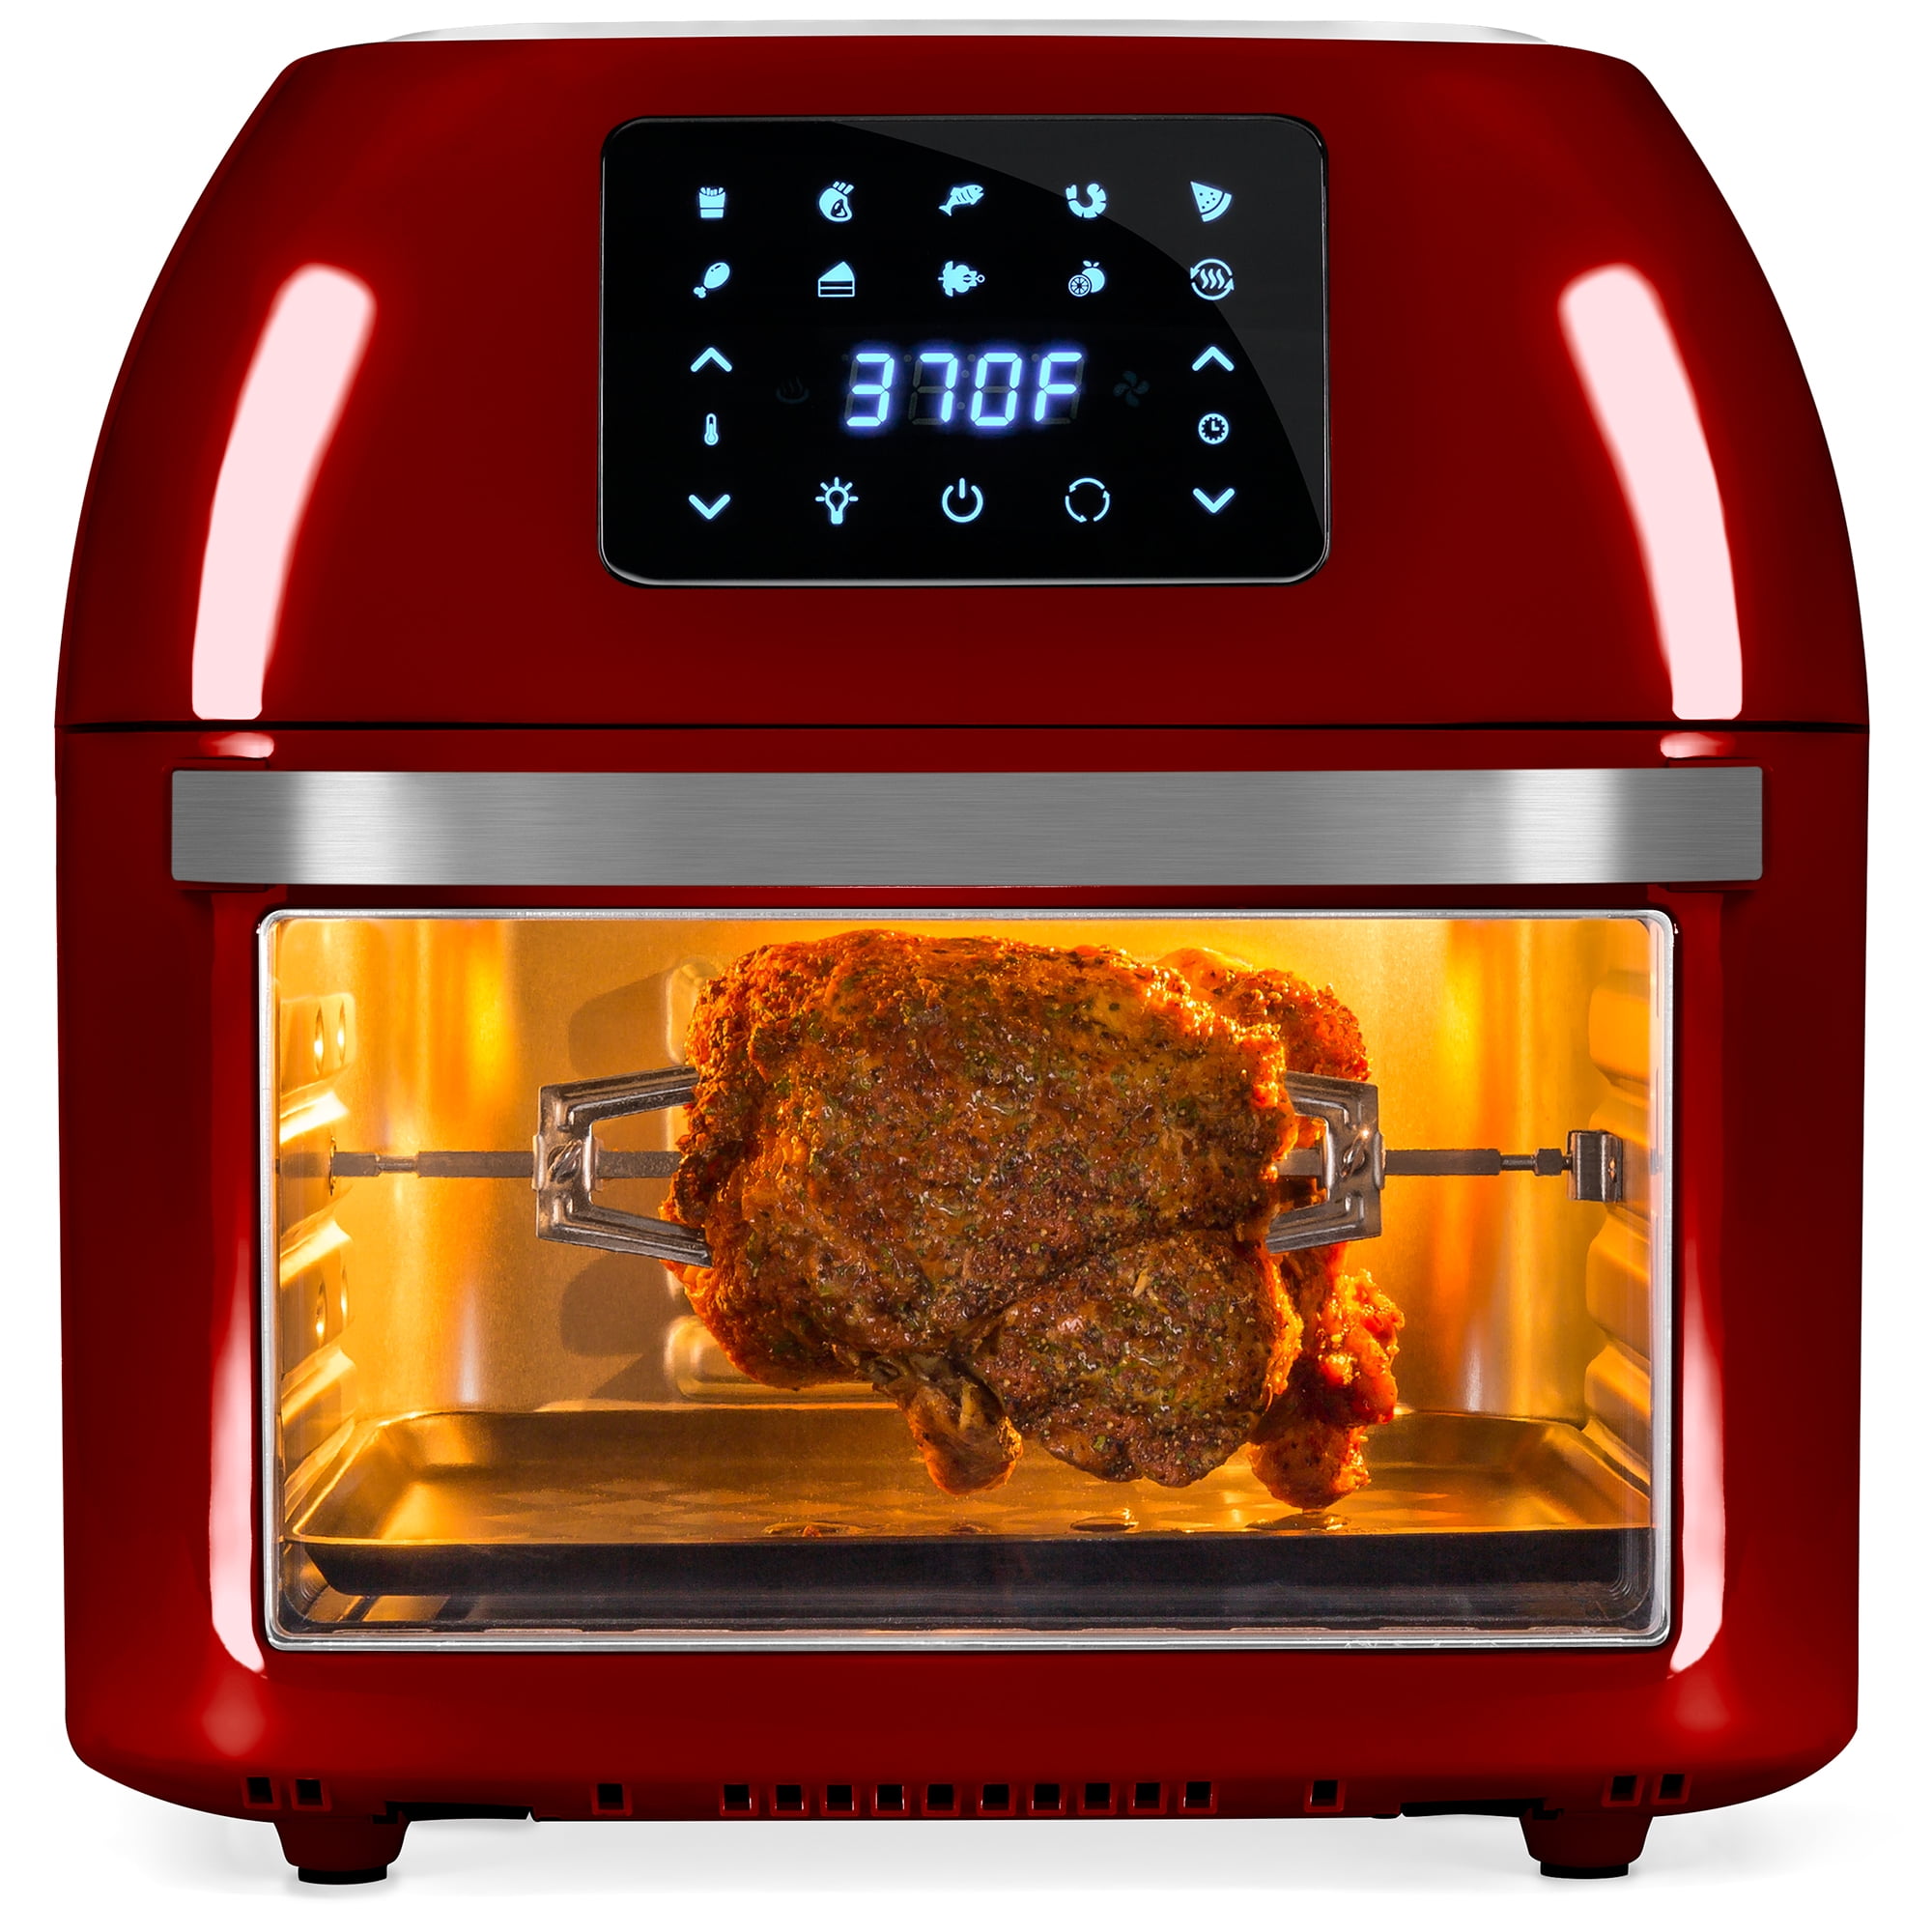 16 Quart Countertop Convection Oven with Rotisserie & Dehydrator Digital Touchscreen Silver built-in Smart Cooking Programs HIFRRUY Air Fryer 10-in-1 AirFryer Toaster Oven Combo Lock Function Accessories 